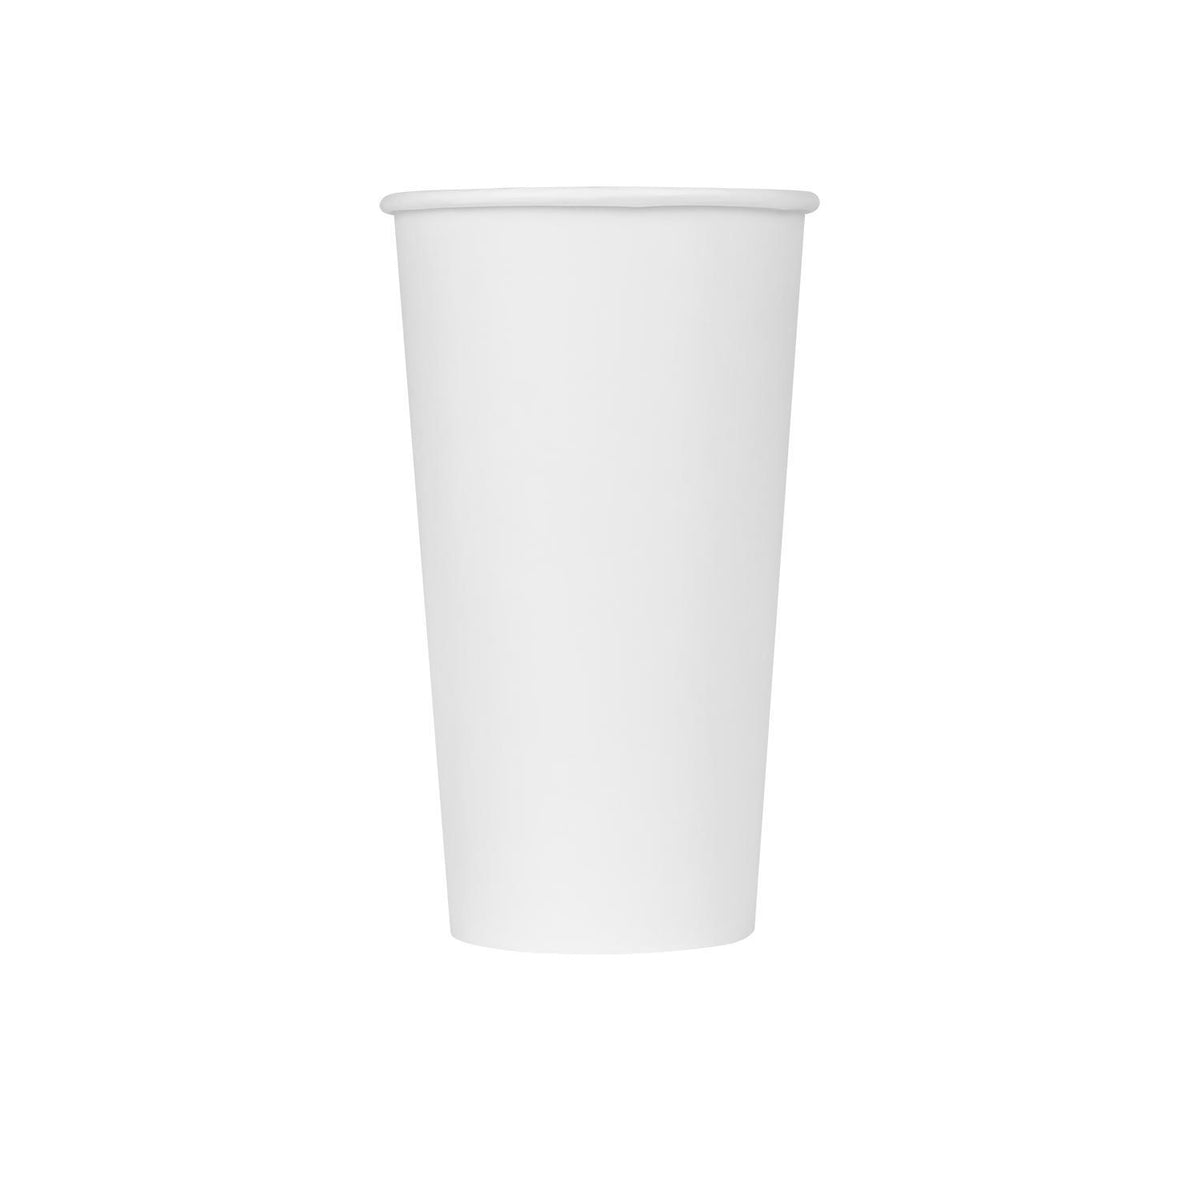 https://www.restaurantsupplydrops.shop/wp-content/uploads/1689/33/coffee-cups-with-logo-20oz-paper-coffee-cups-white-90mm-30000-cups-karat-find-the-latest-trends-in-fashion-and-order-today_0.jpg